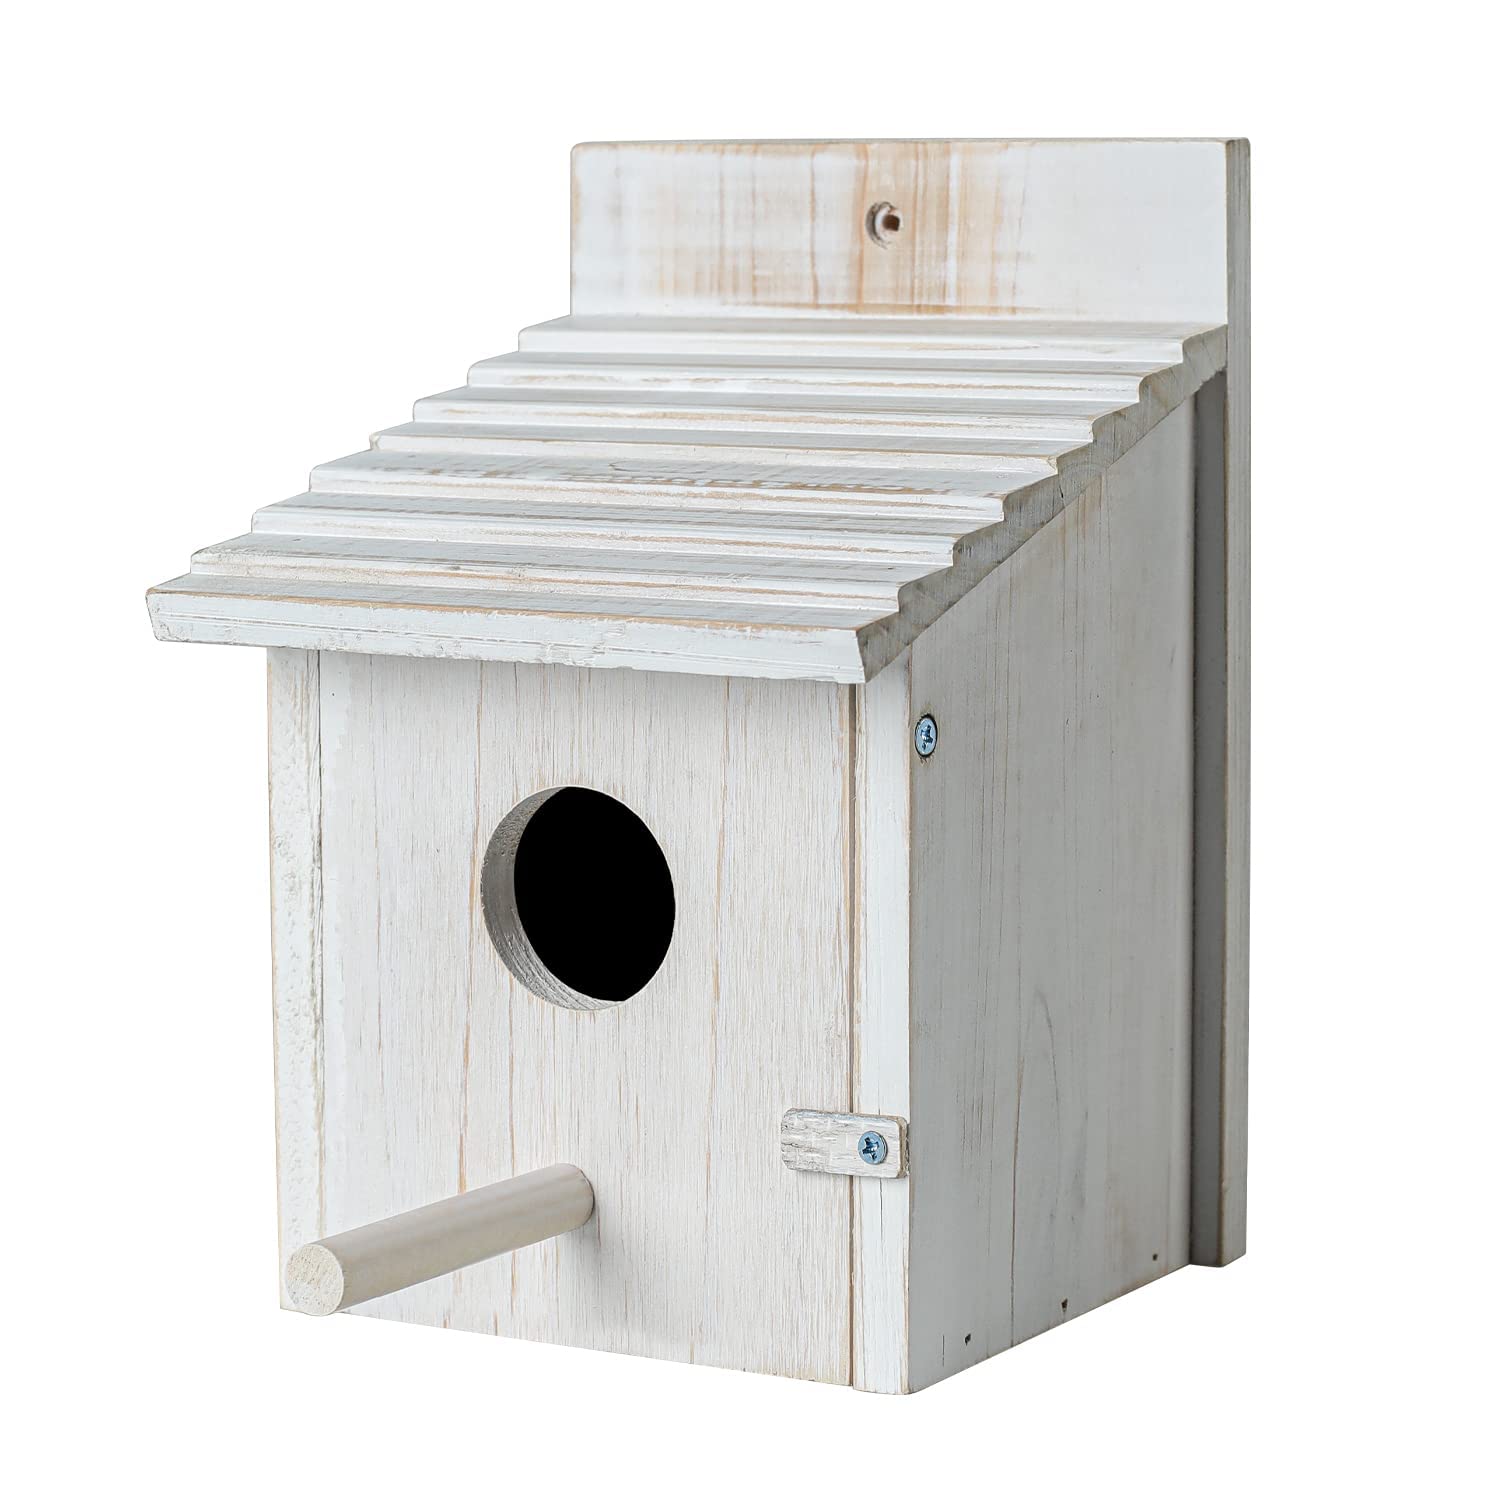 NATUREYLWL Bird House for Outside with Pole for Finch Bluebird Cardinals Garden Wooden Hanging Birdhouses